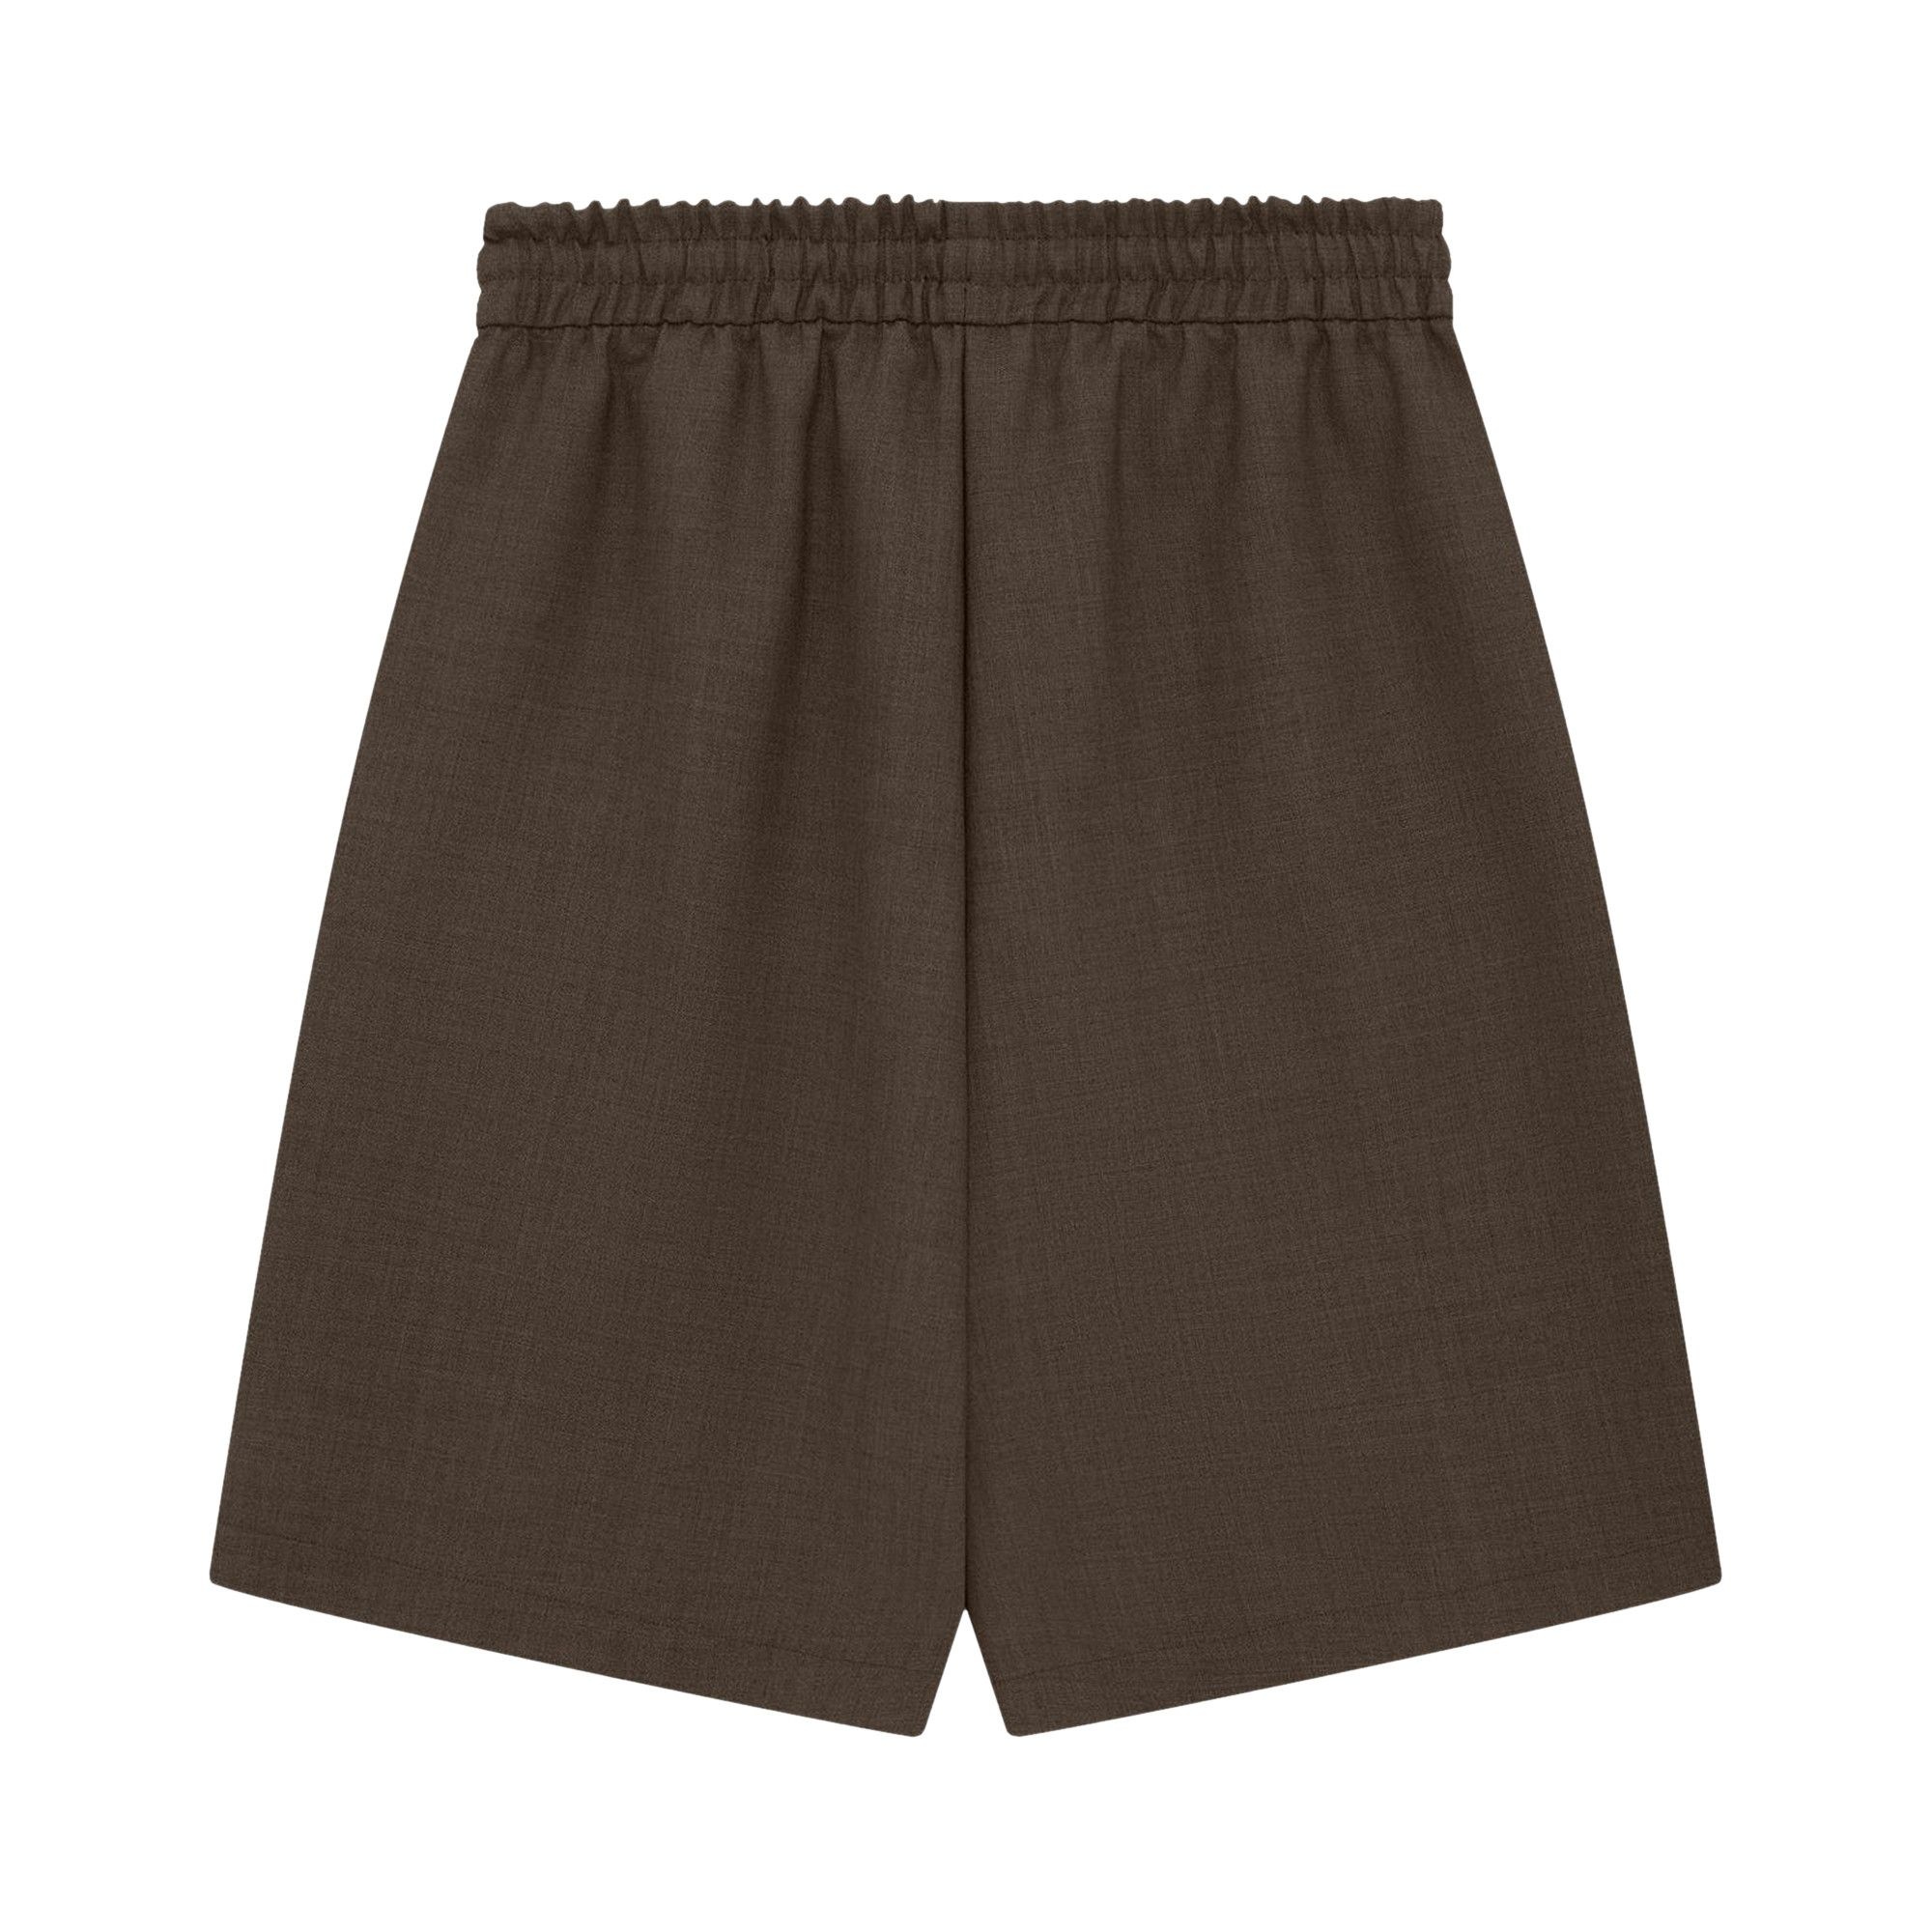 Fear of God Relaxed Short 'Tan' - 2